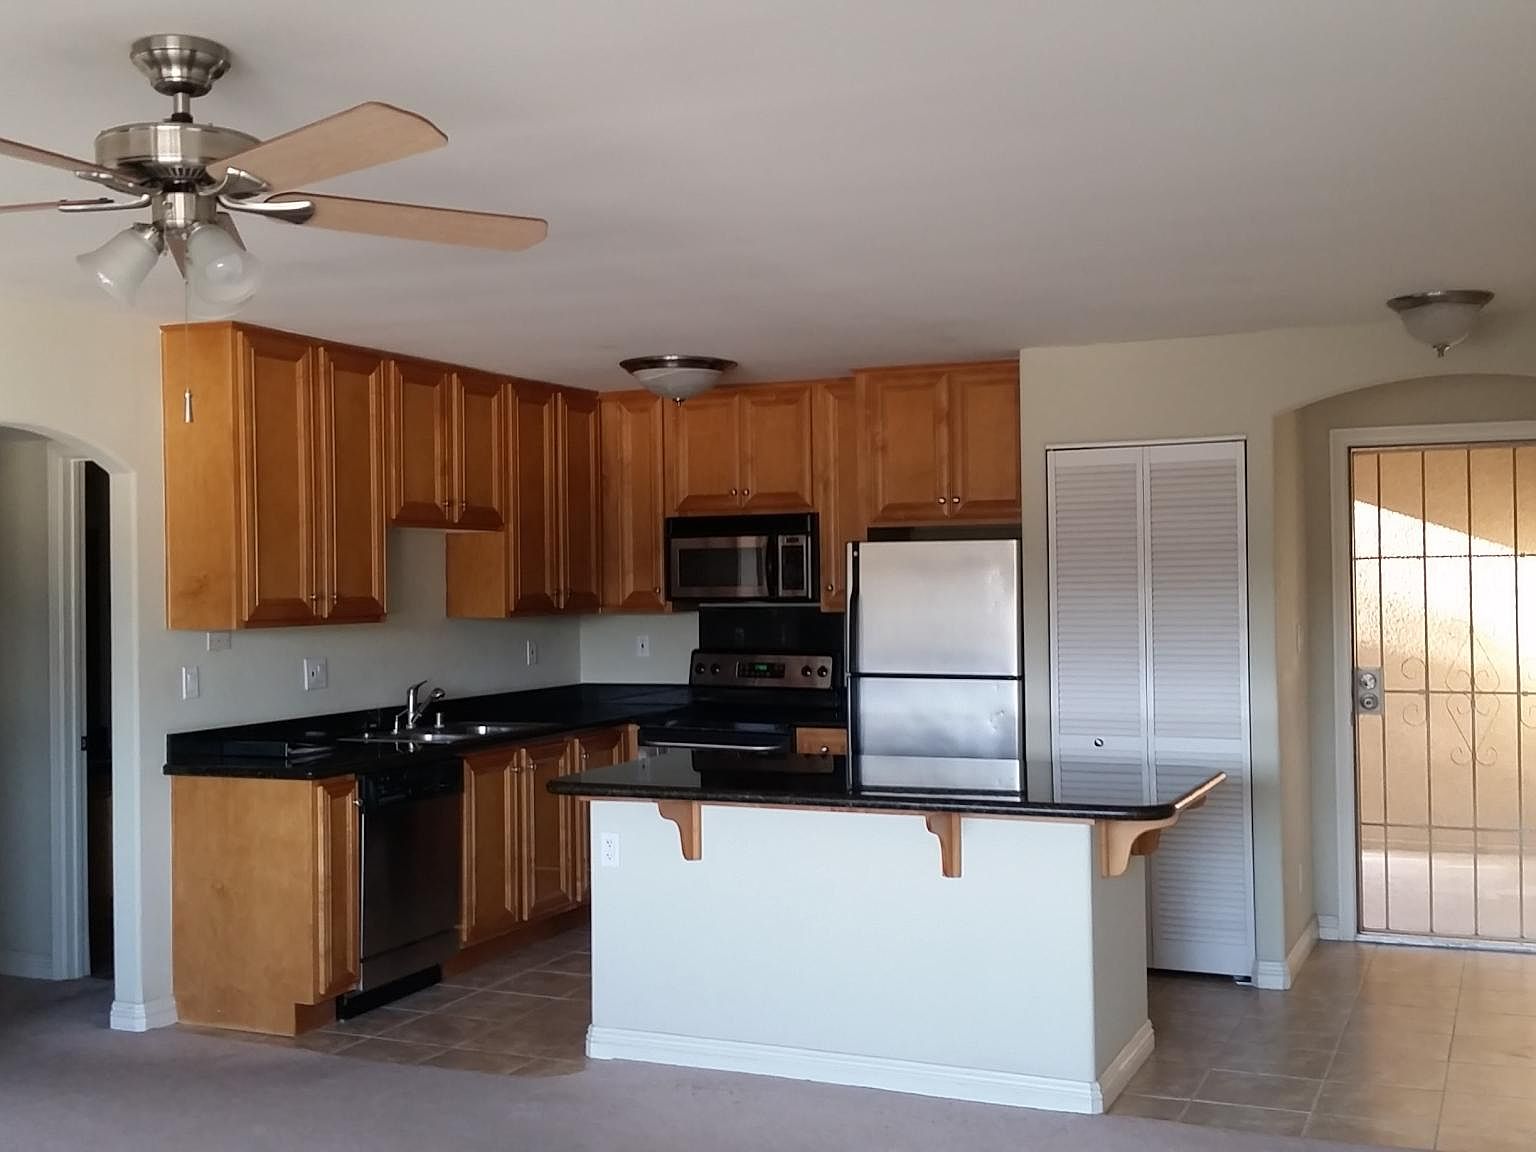 1205 Colusa St San Diego, CA, 92110 - Apartments for Rent | Zillow